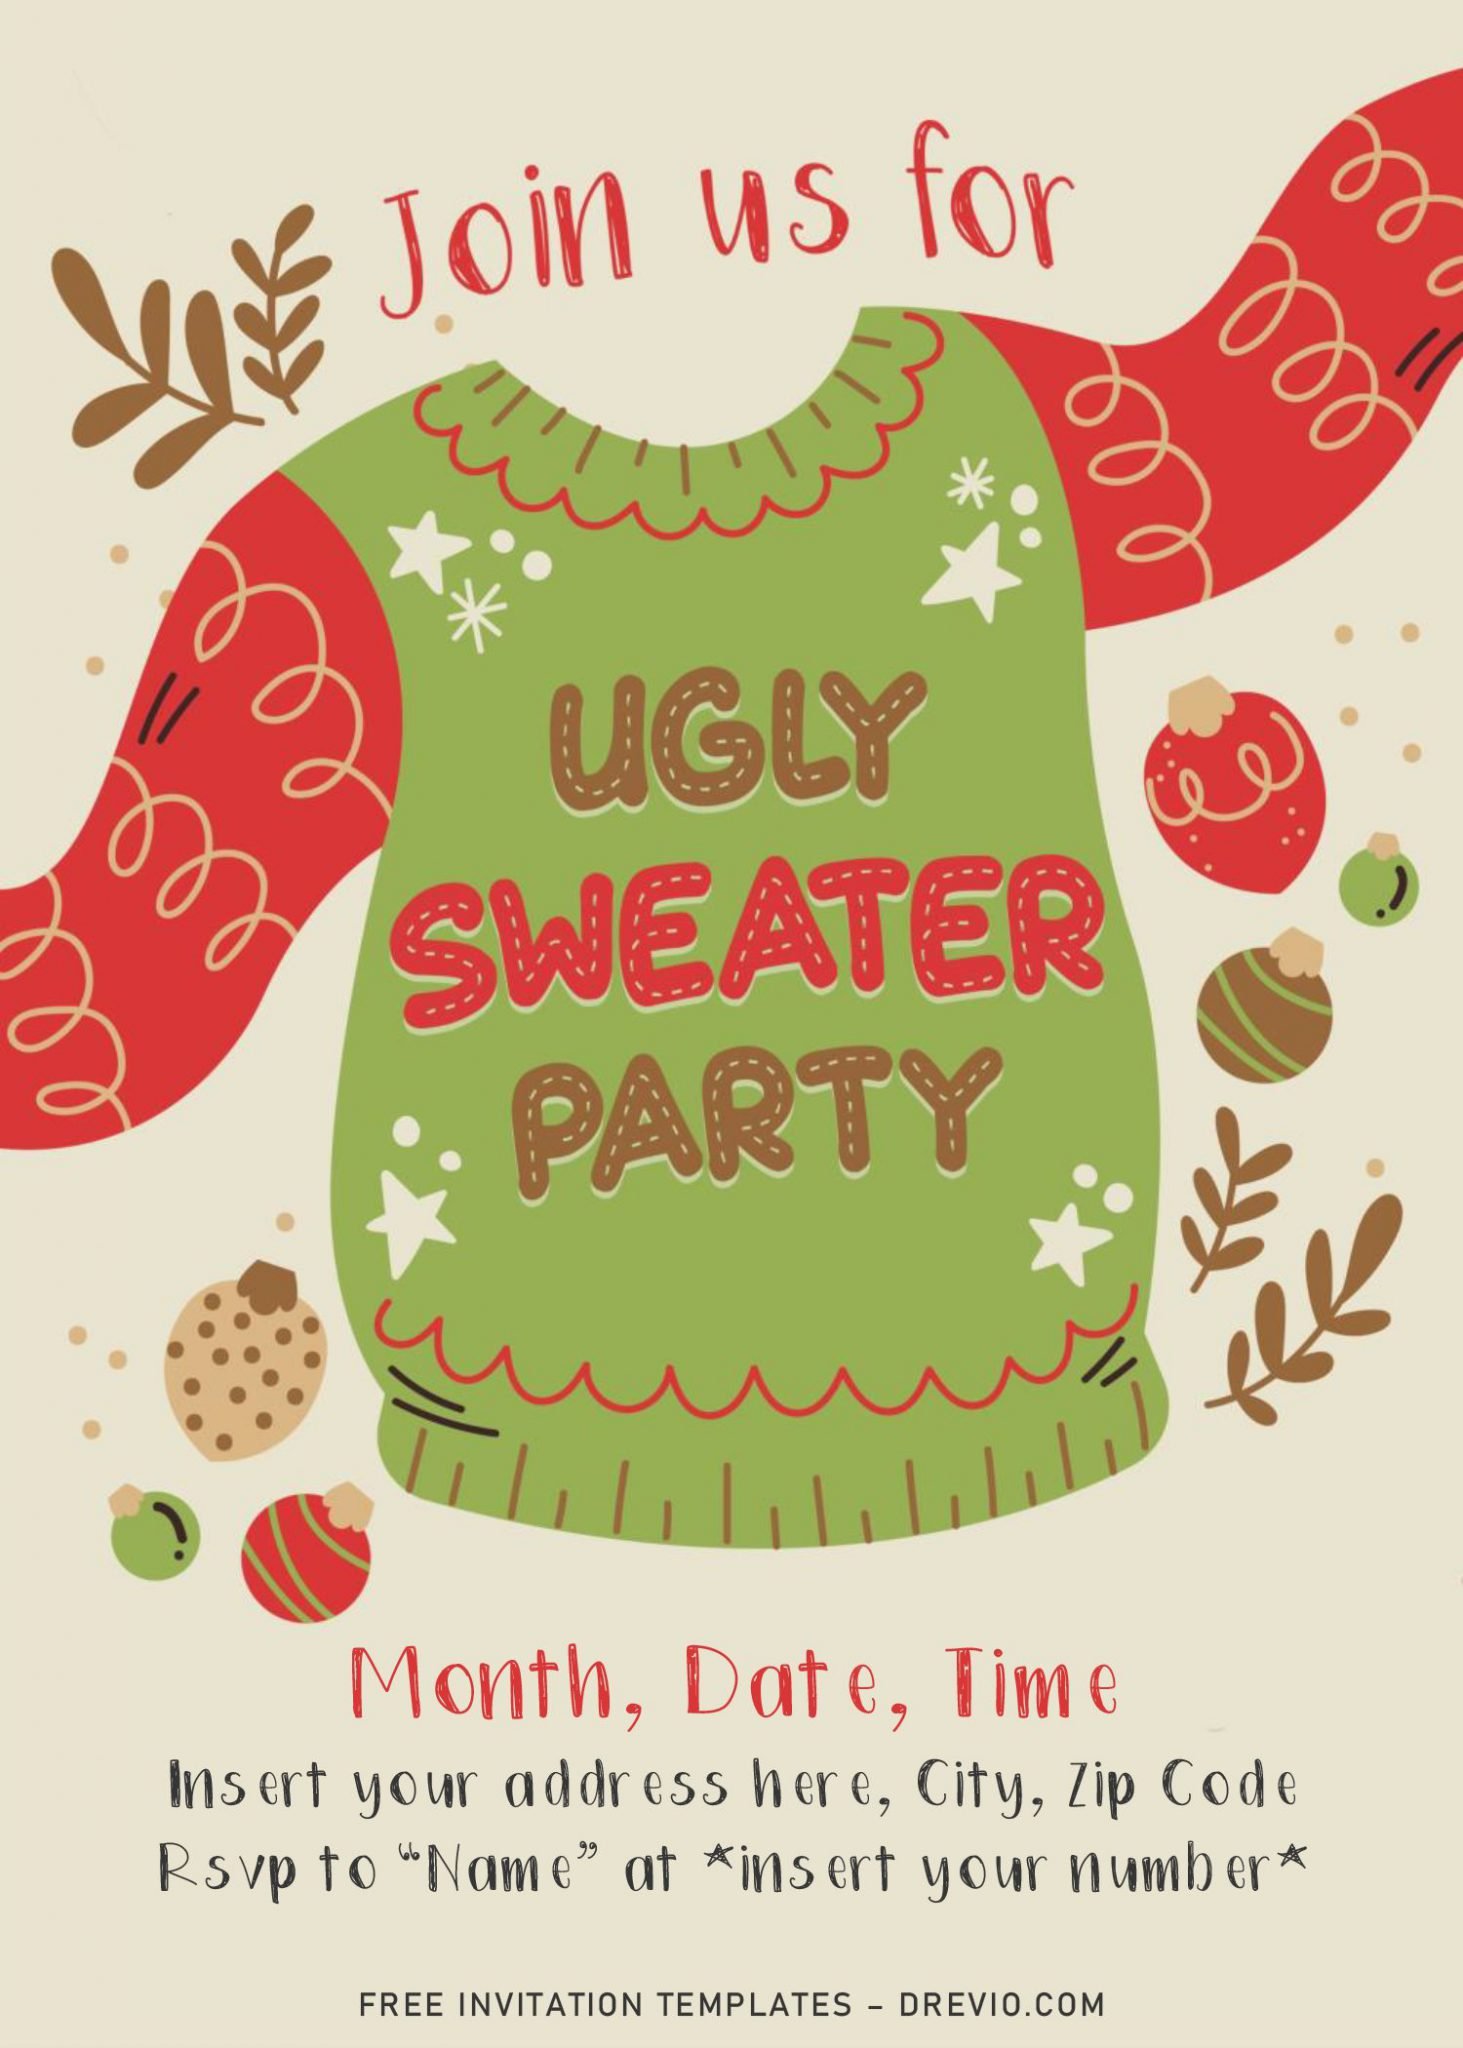 free-ugly-sweater-party-invitation-templates-for-word-download